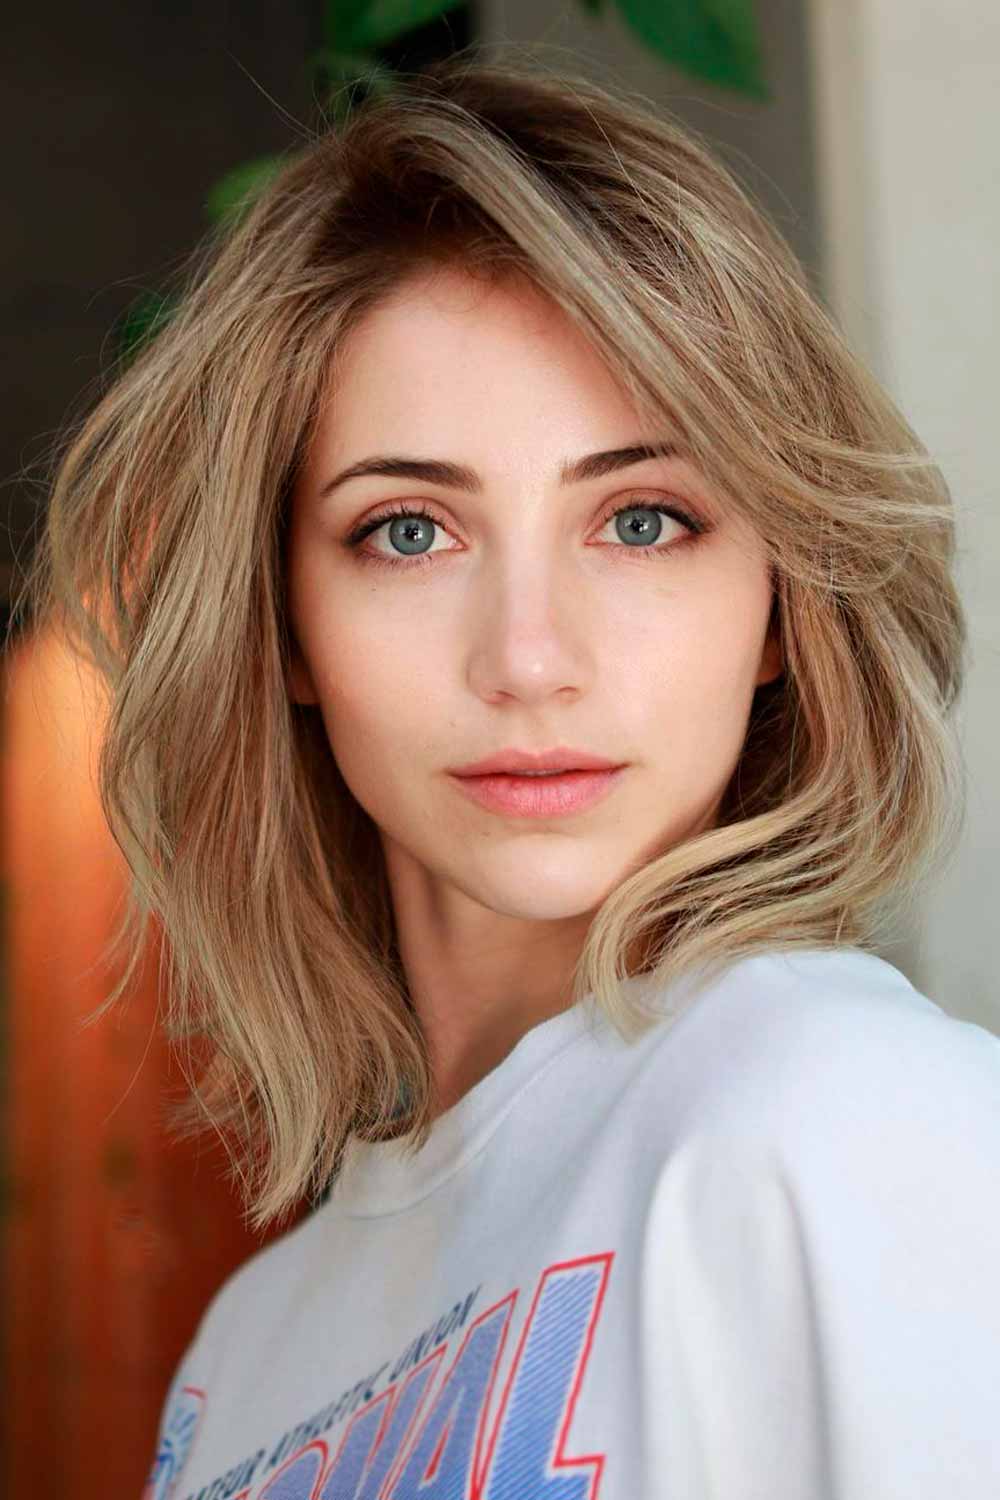 Cute Layered Short Dirty Blonde Hair for Woman #dirtyblondehair #dirtyblonde #blondehair #blonde